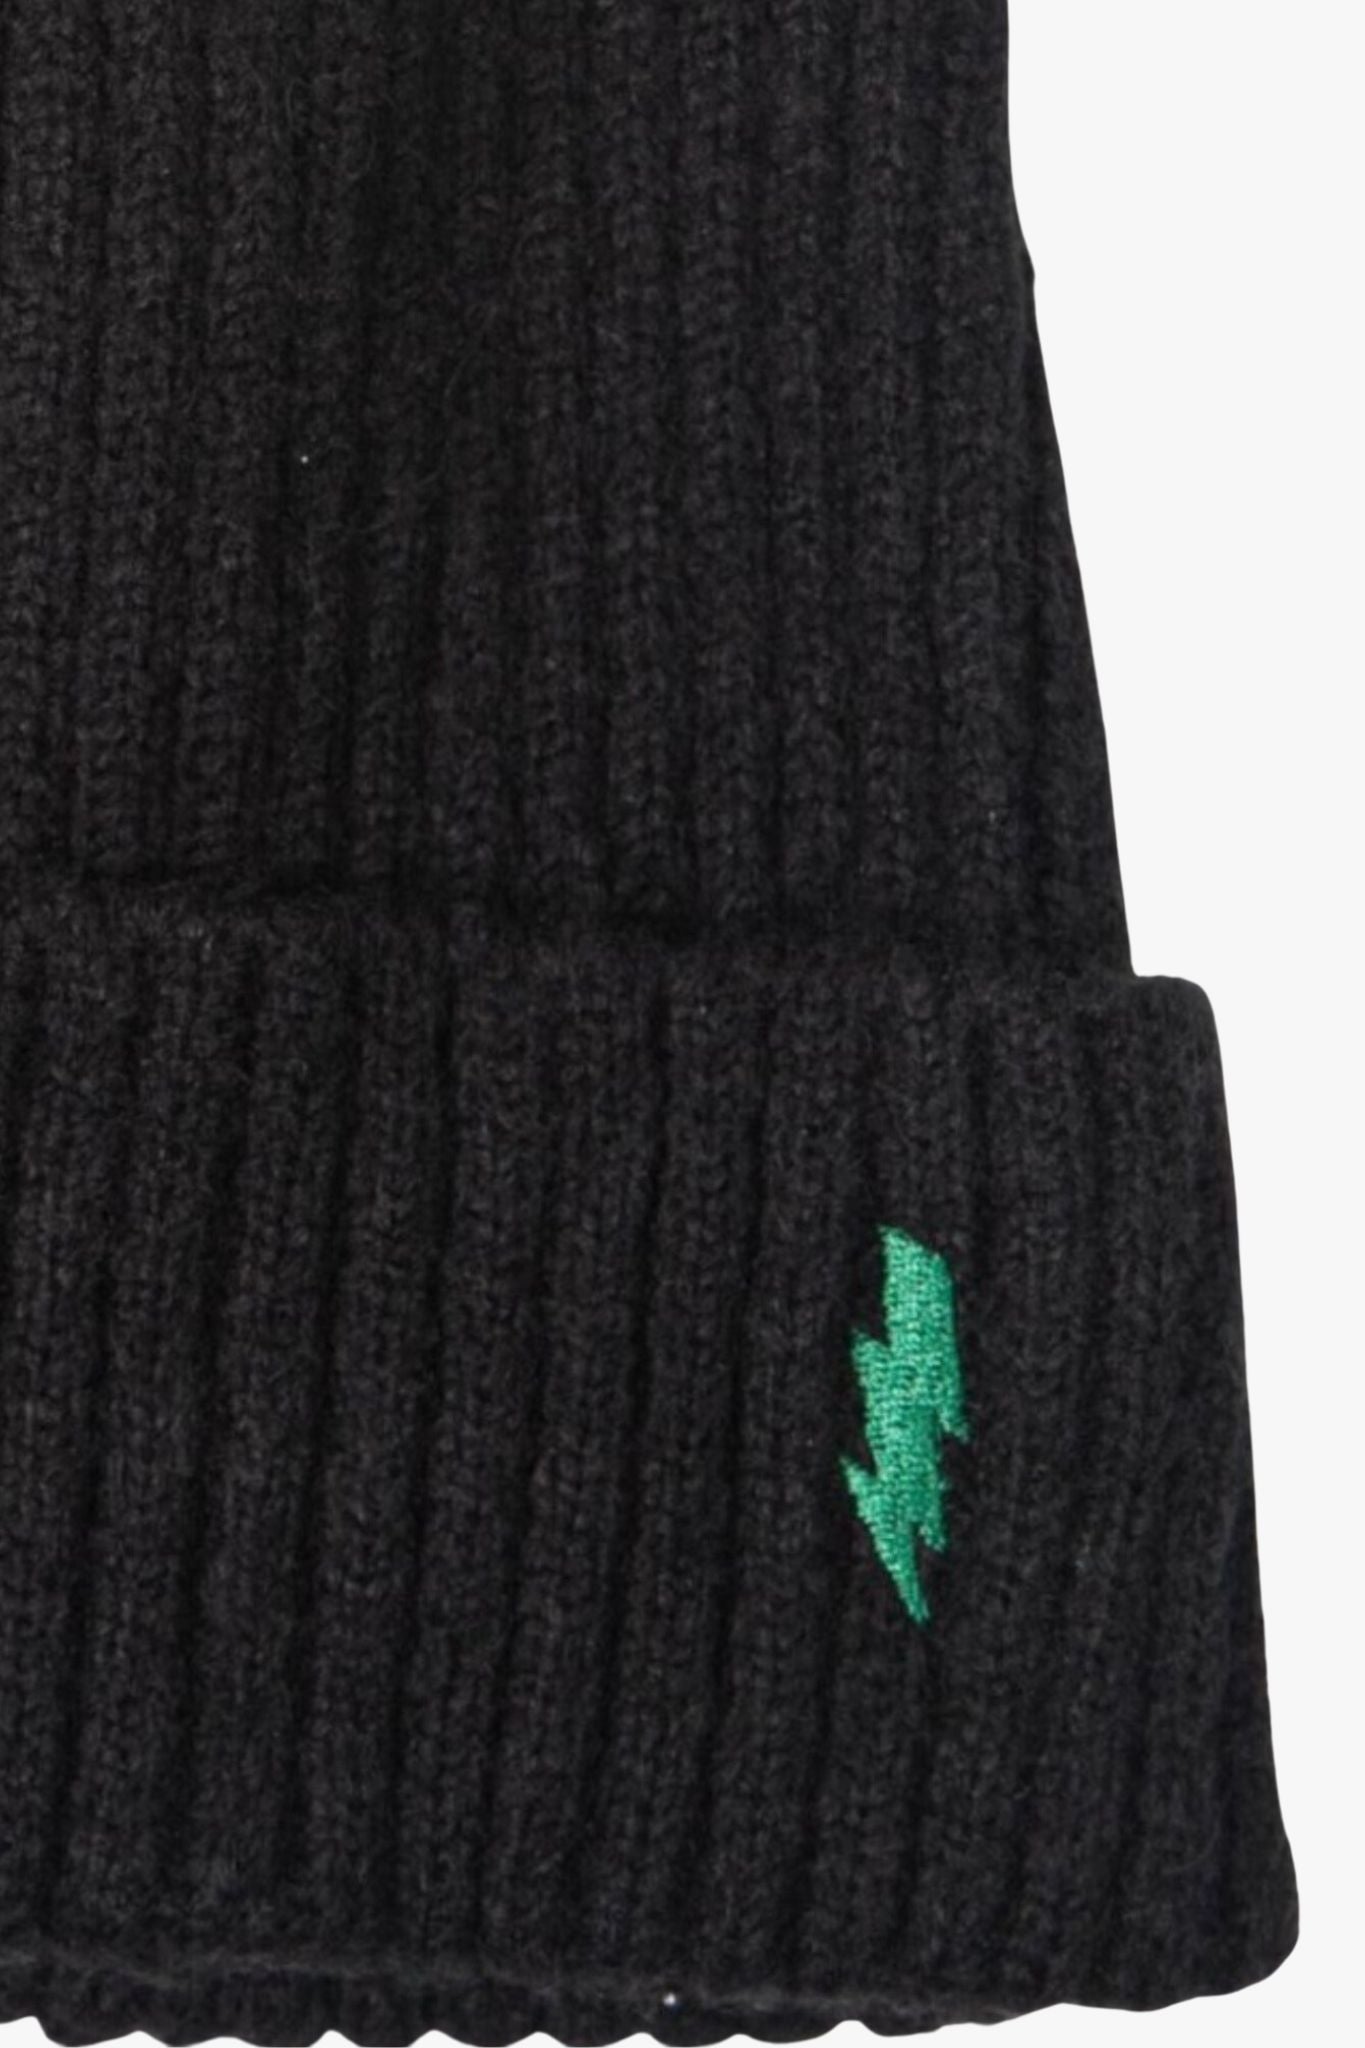 close up of the green embroidered lightning bolt and ribbed knitted fabric